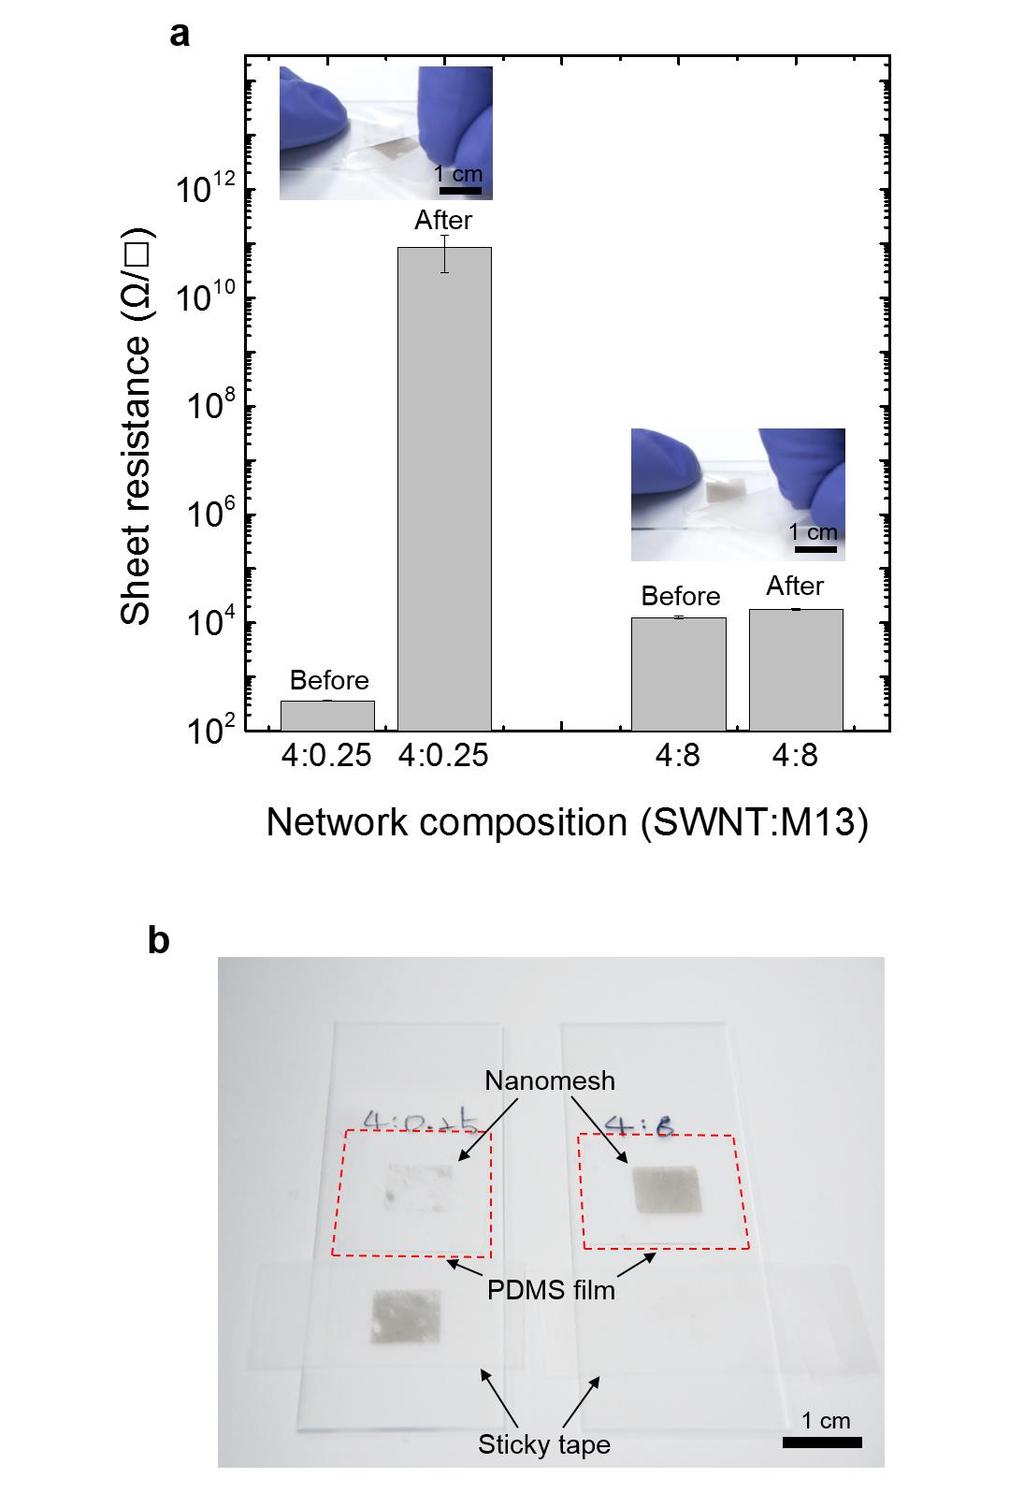 Figure S4. (a) Comparison of the sheet resistance of the SWNT/M13 phage networks of the composition of 4:0.25 and 4:8 before and after the peeling test.